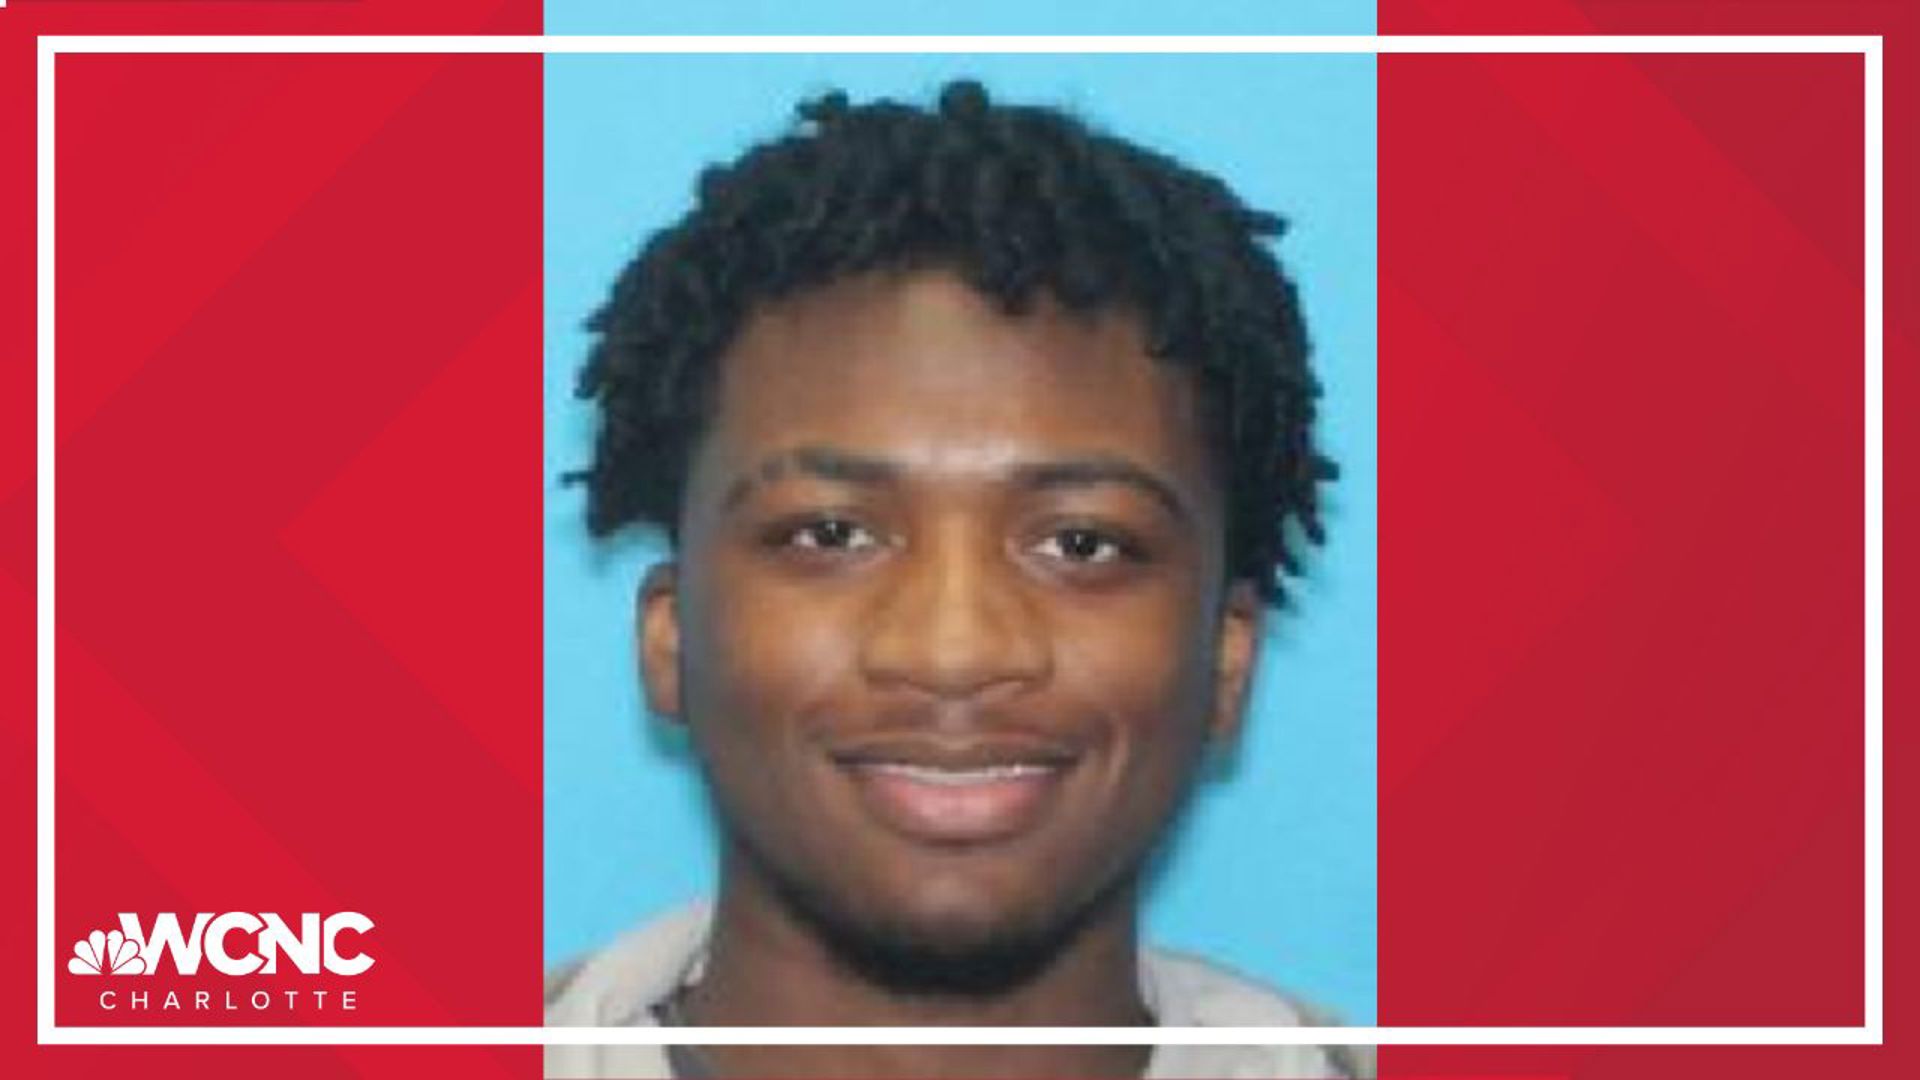 CMPD is asking for the public's help finding an "armed and dangerous" suspect wanted in connection with a deadly shooting in east Charlotte on April 12.